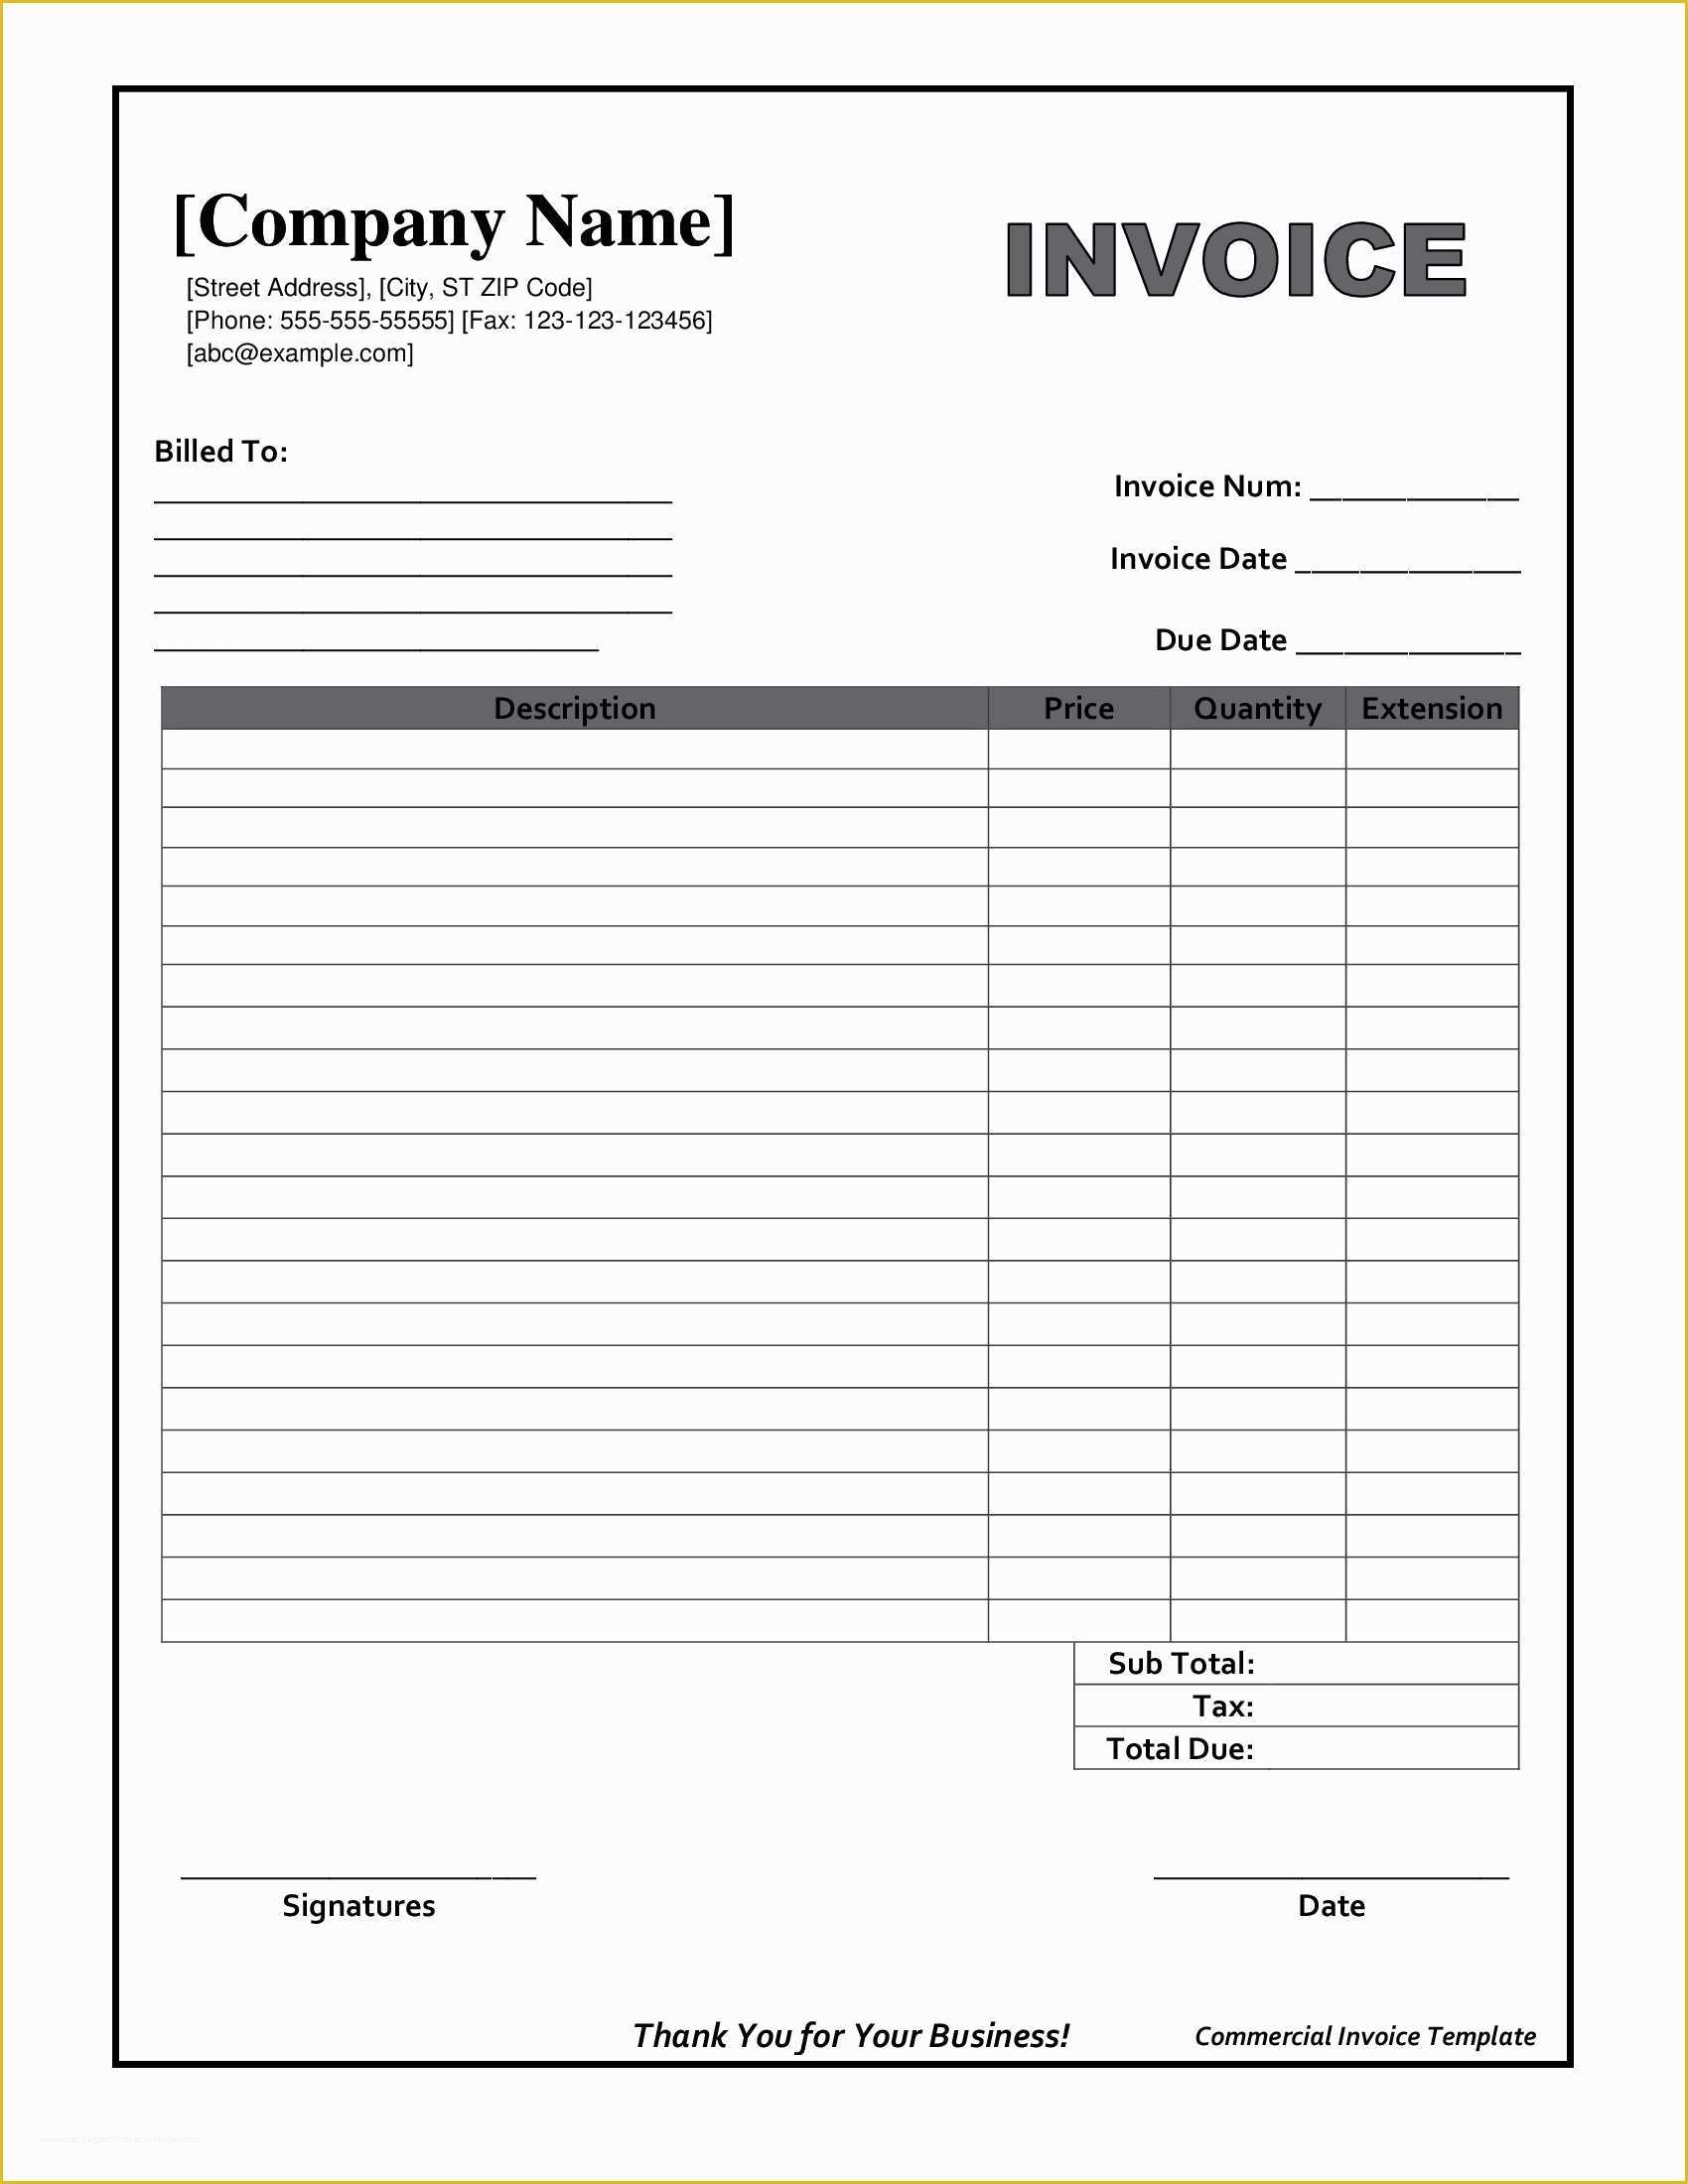 Free Printable Invoice Templates Excel Of Blank Invoice form Free